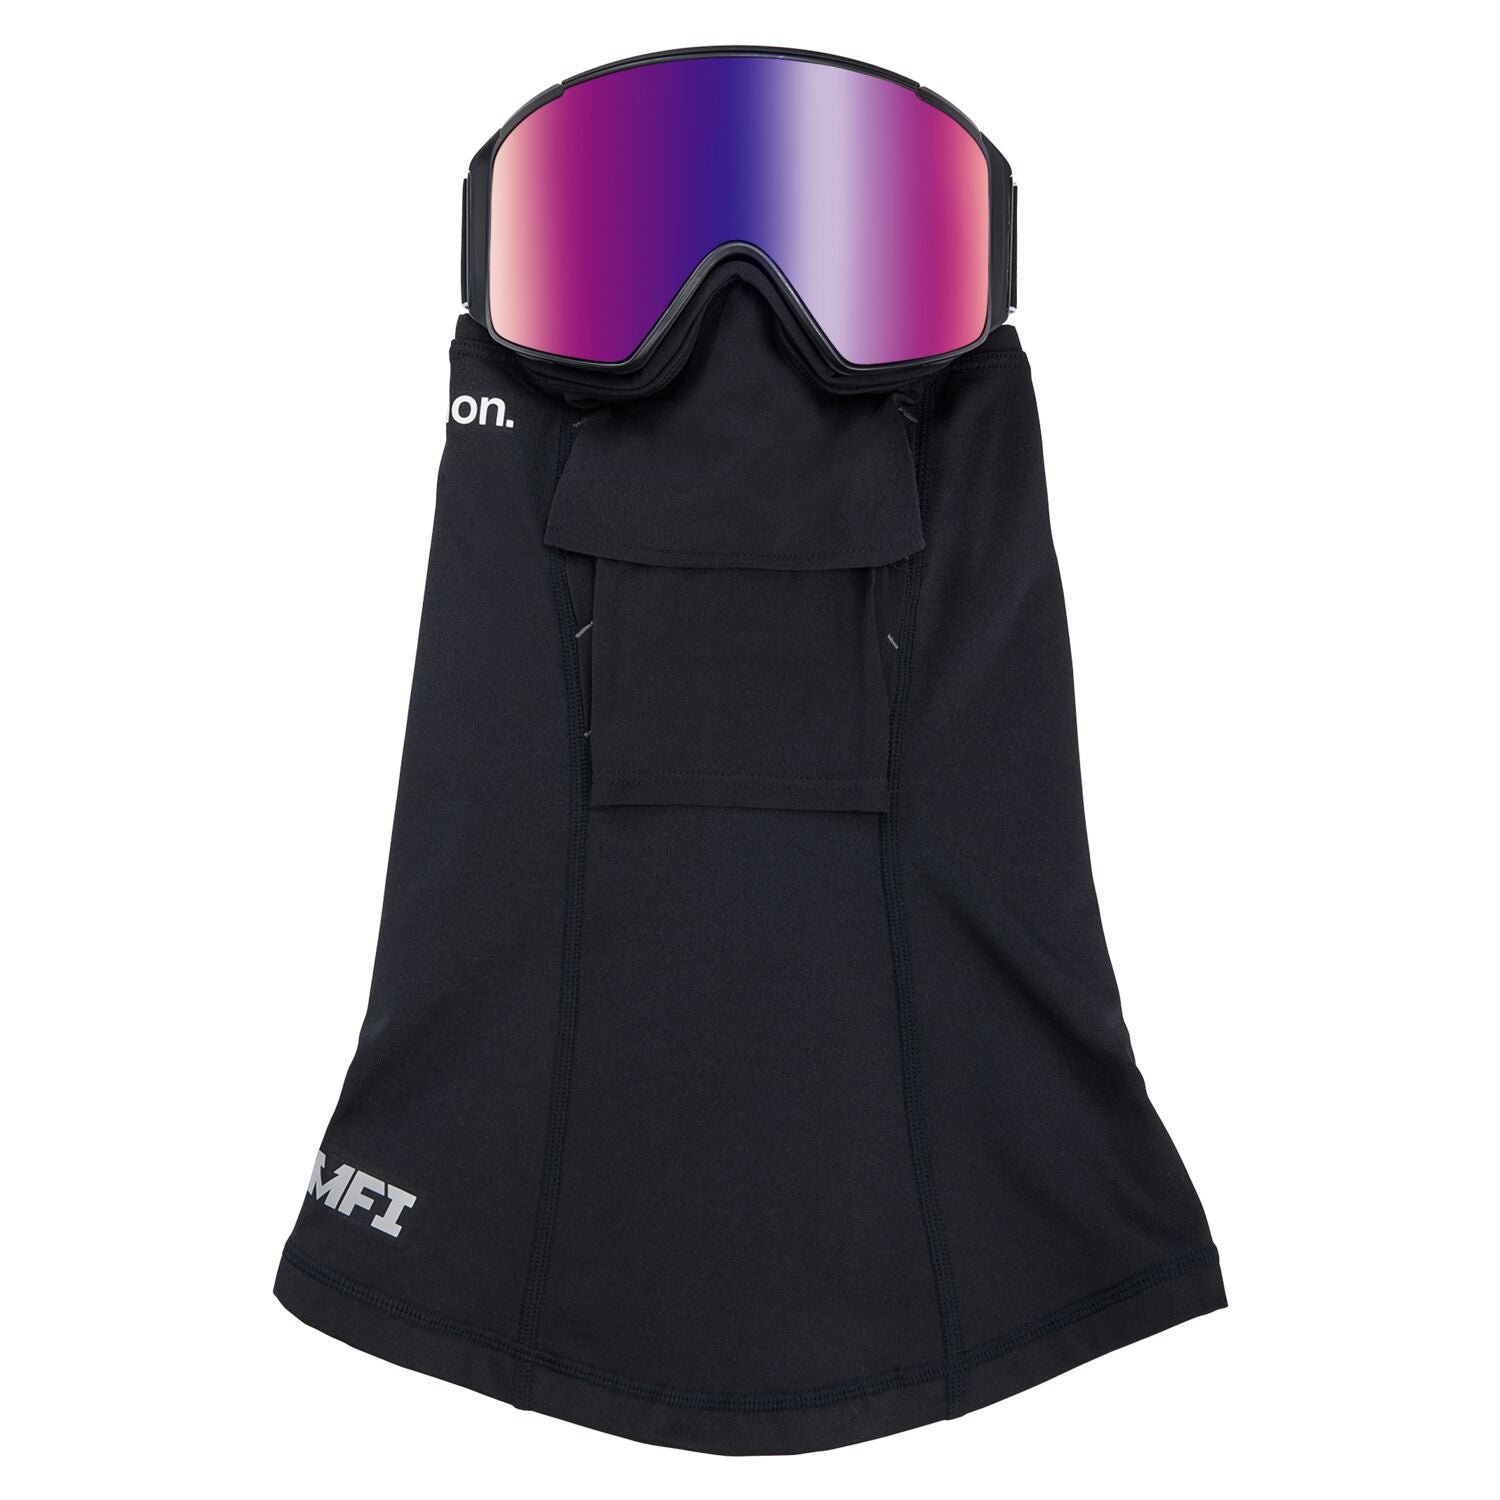 Anon M4S Cylindrical Goggles + Bonus Lens + MFI Face Mask Black Perceive Sunny Red Snow Goggles